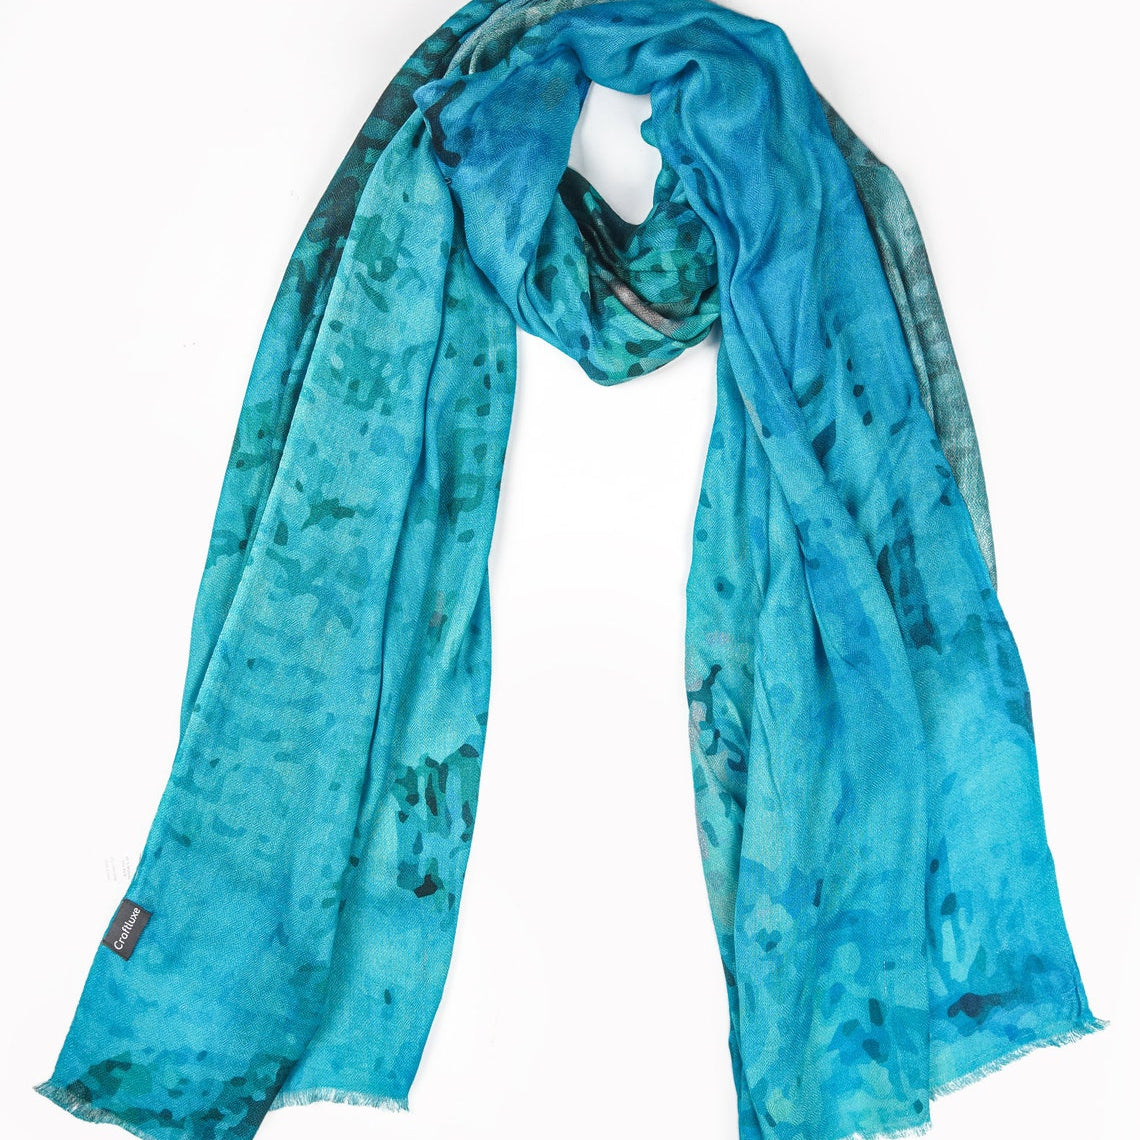 Silk Modal Scarf, long all season scarf in luxurious fabric blend, shawl and wrap, accessories for women, gifts for her, summer scarf, shawl - Blue